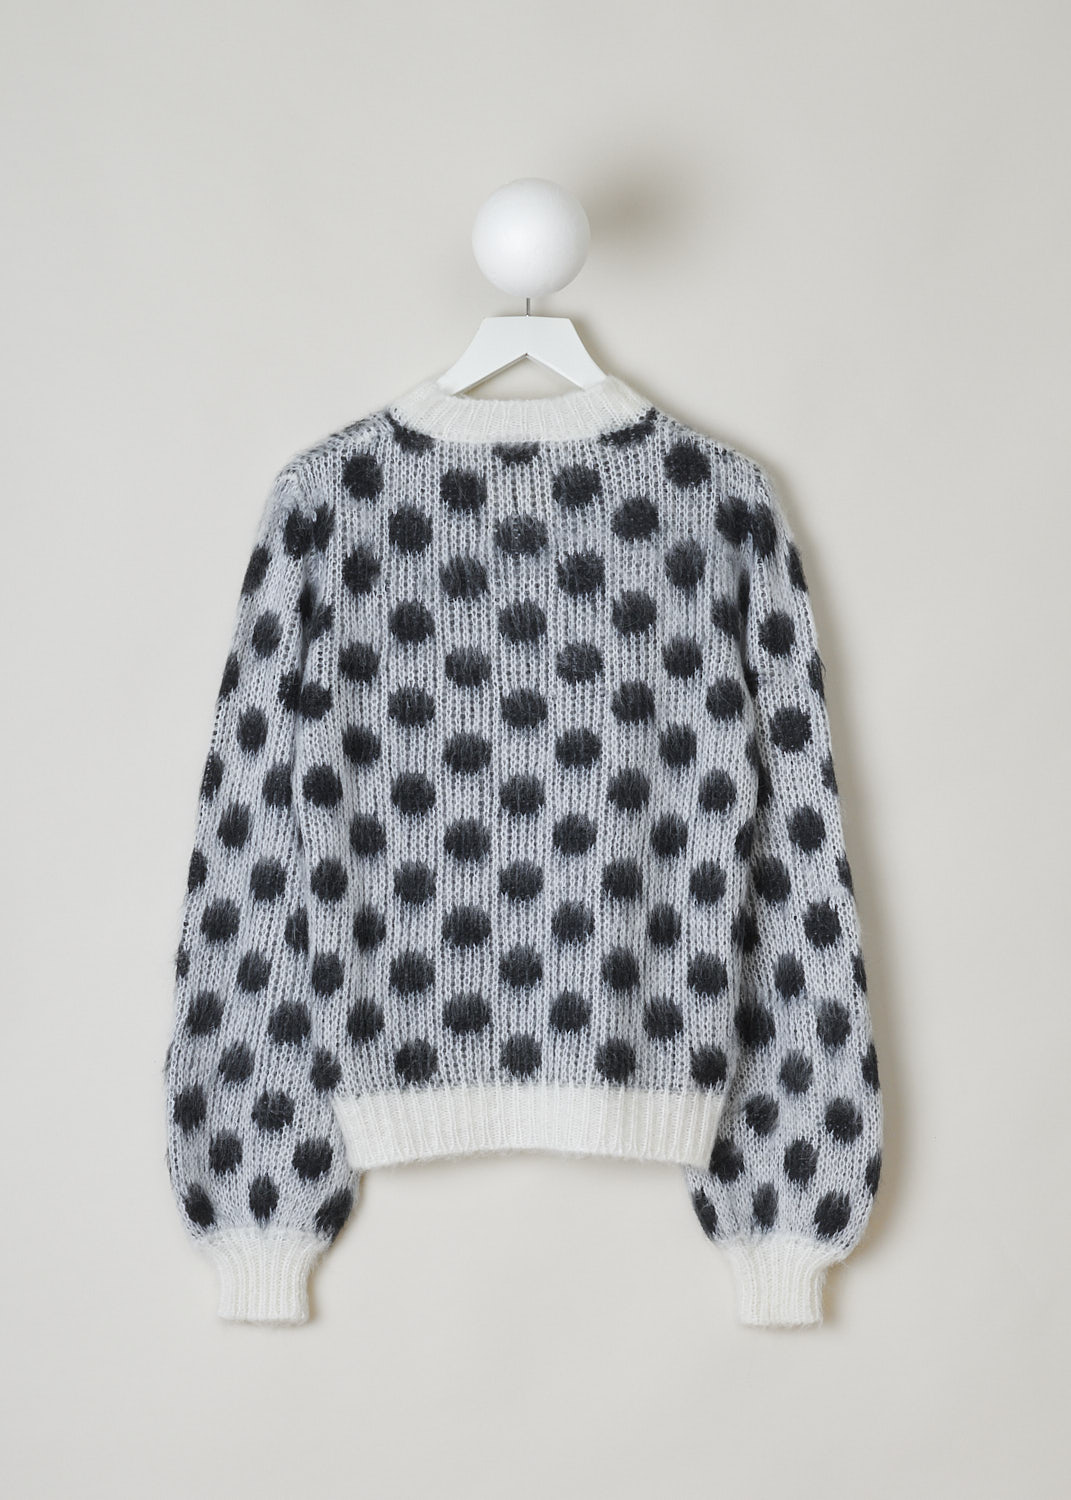 MARNI, BRUSHED DOTS FUZZY WUZZY SWEATER, GCMMD0476Q0_UFU160_DOW0, Grey, Print, Black, Back, This brushed dots Fuzzy Wuzzy crew neck sweater has a white neckline with a ribbed finish. That same white ribbed finish can be found on the cuffs and hemline. The sweater has a two-tone dot pattern in grey and black.
